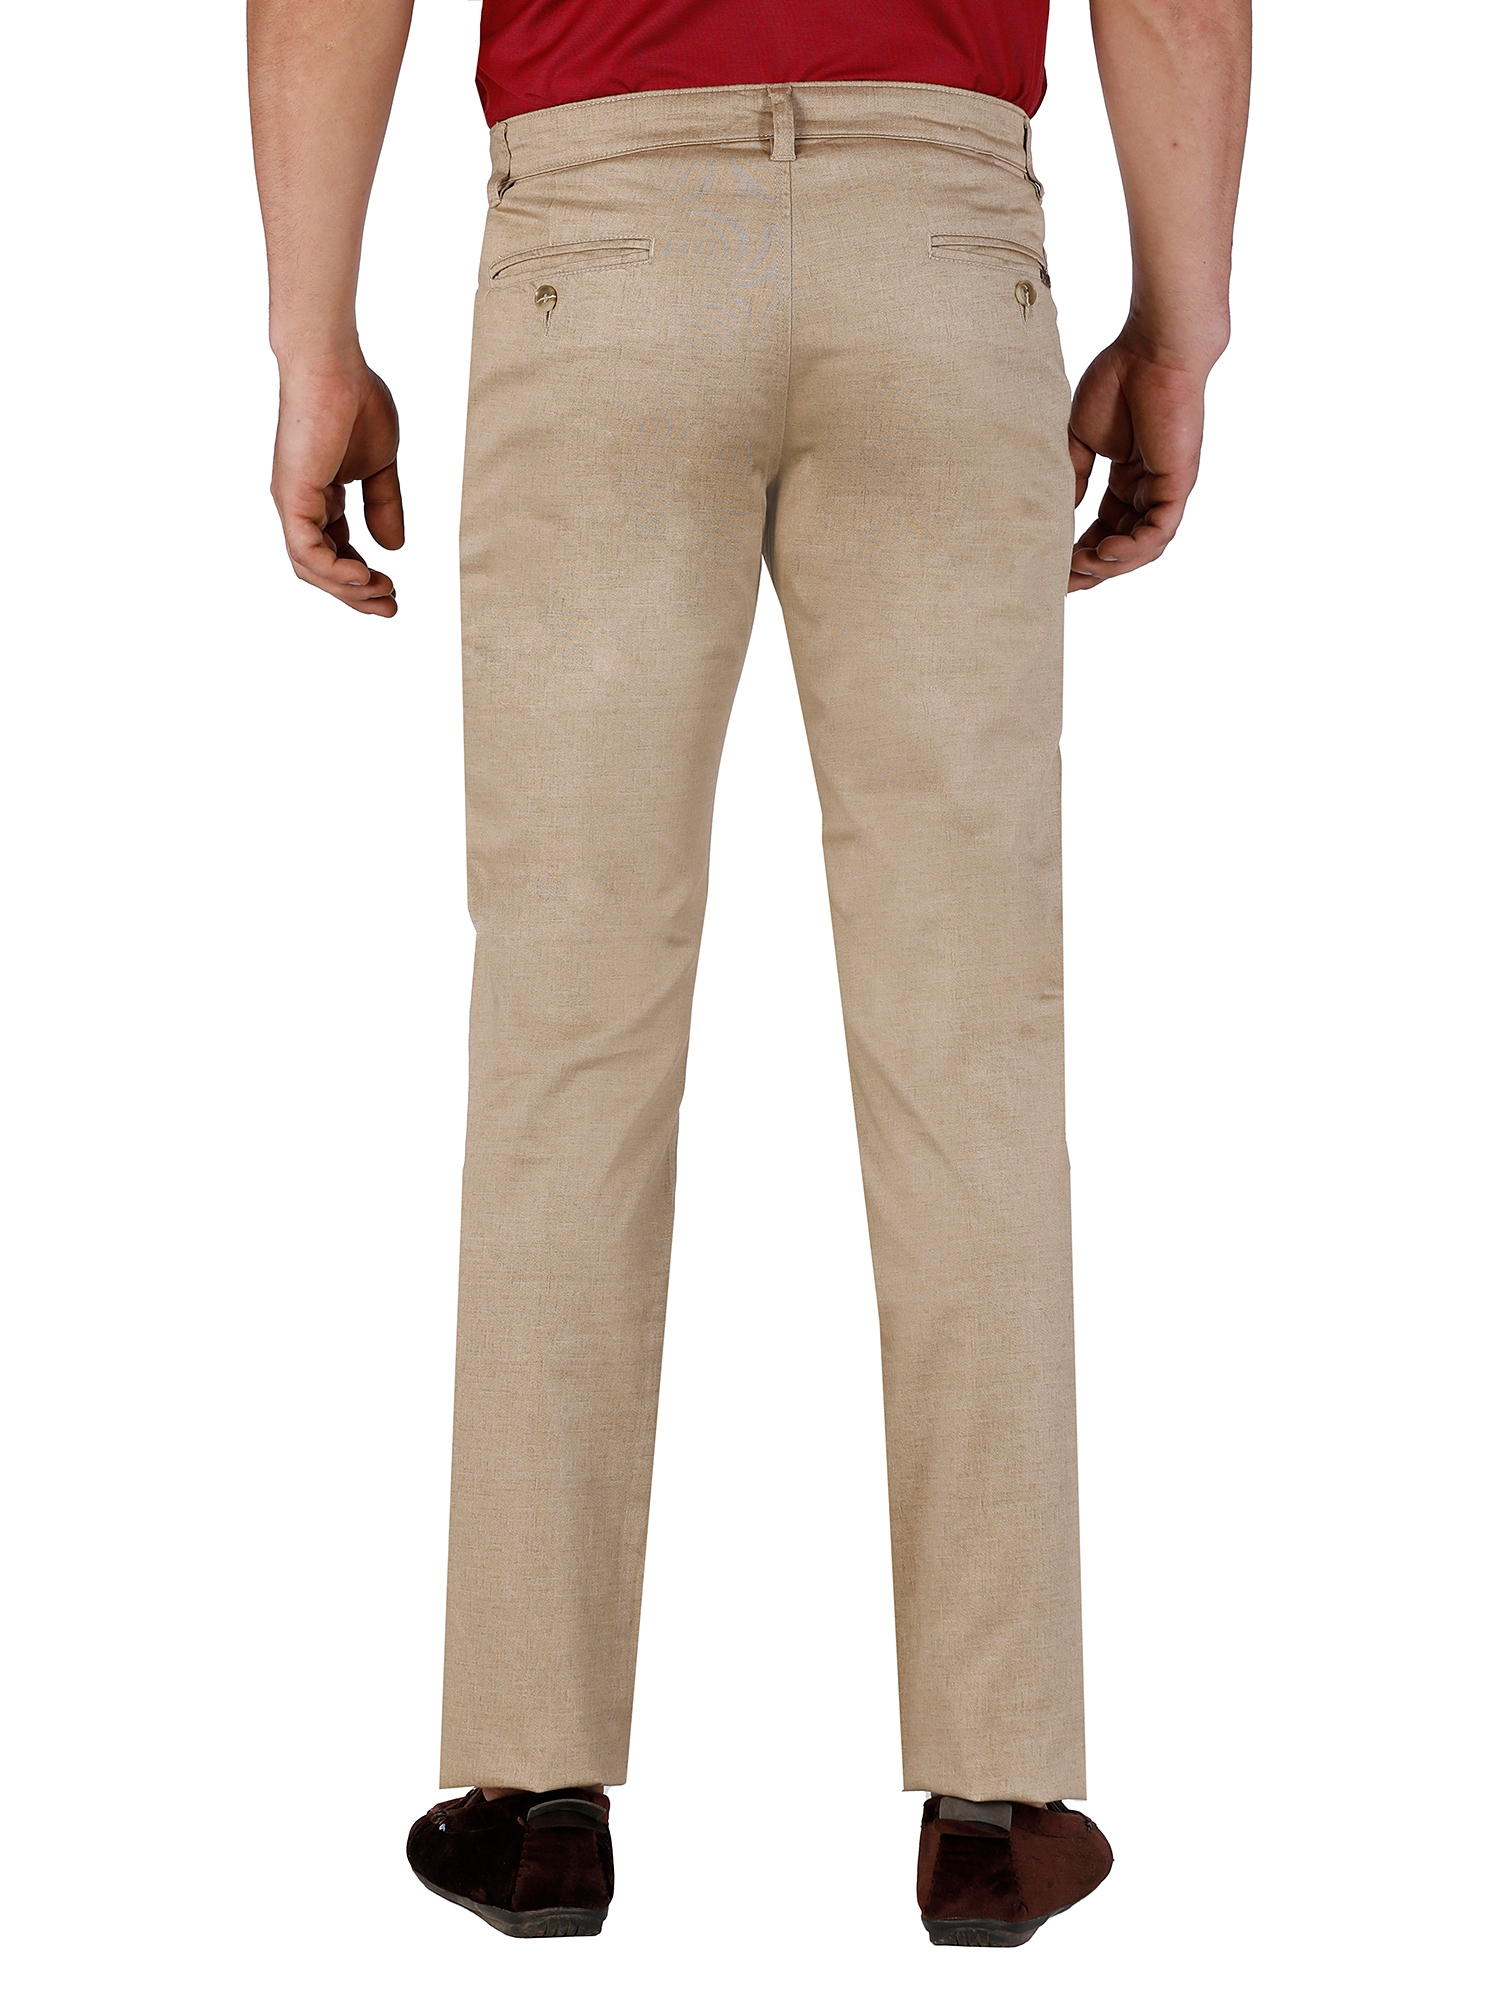 D'cot by Donear | D'cot by Donear Men Brown Cotton Relaxed Solid Casual Trouser